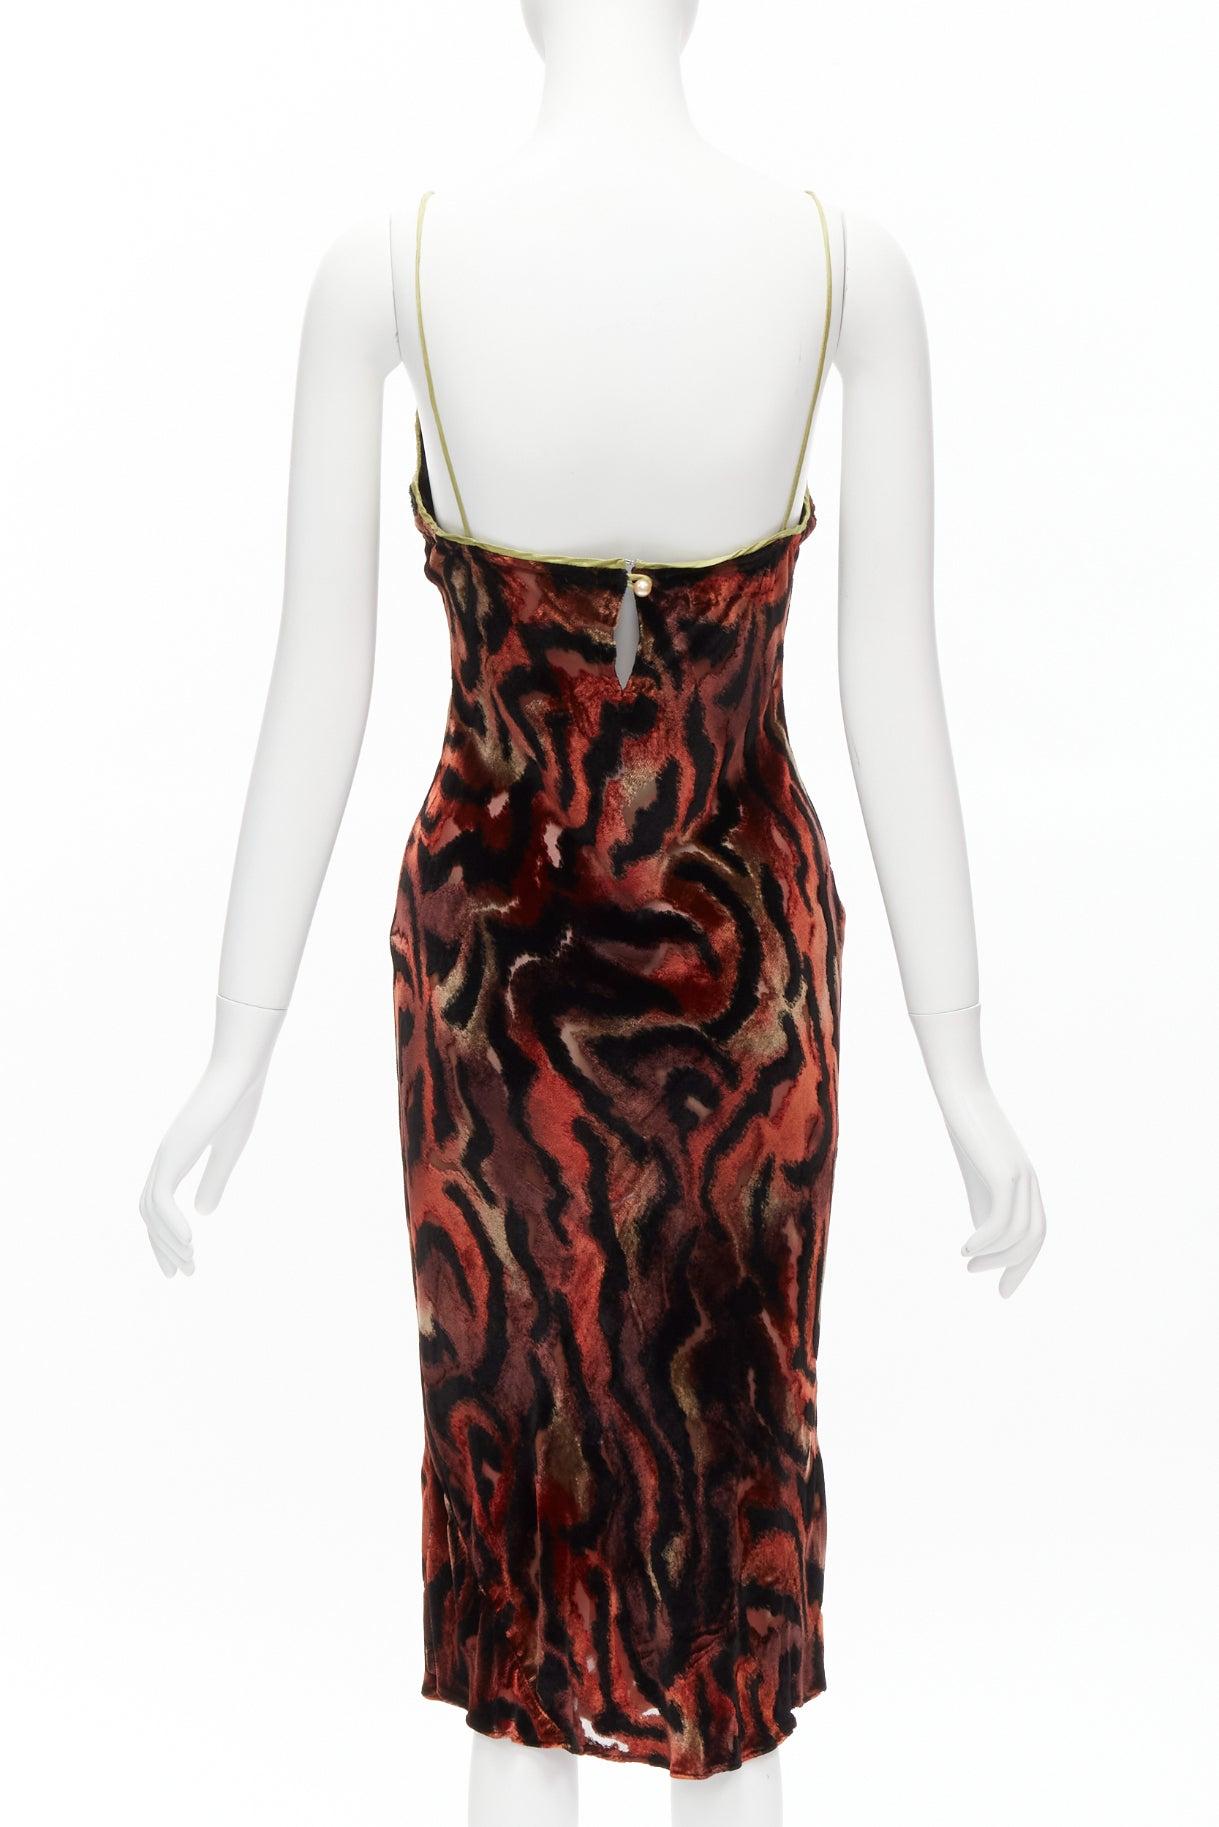 VOYAGE INVEST IN THE ORIGINAL LONDON swirl velvet sheer embroidebust slip dress In Excellent Condition For Sale In Hong Kong, NT